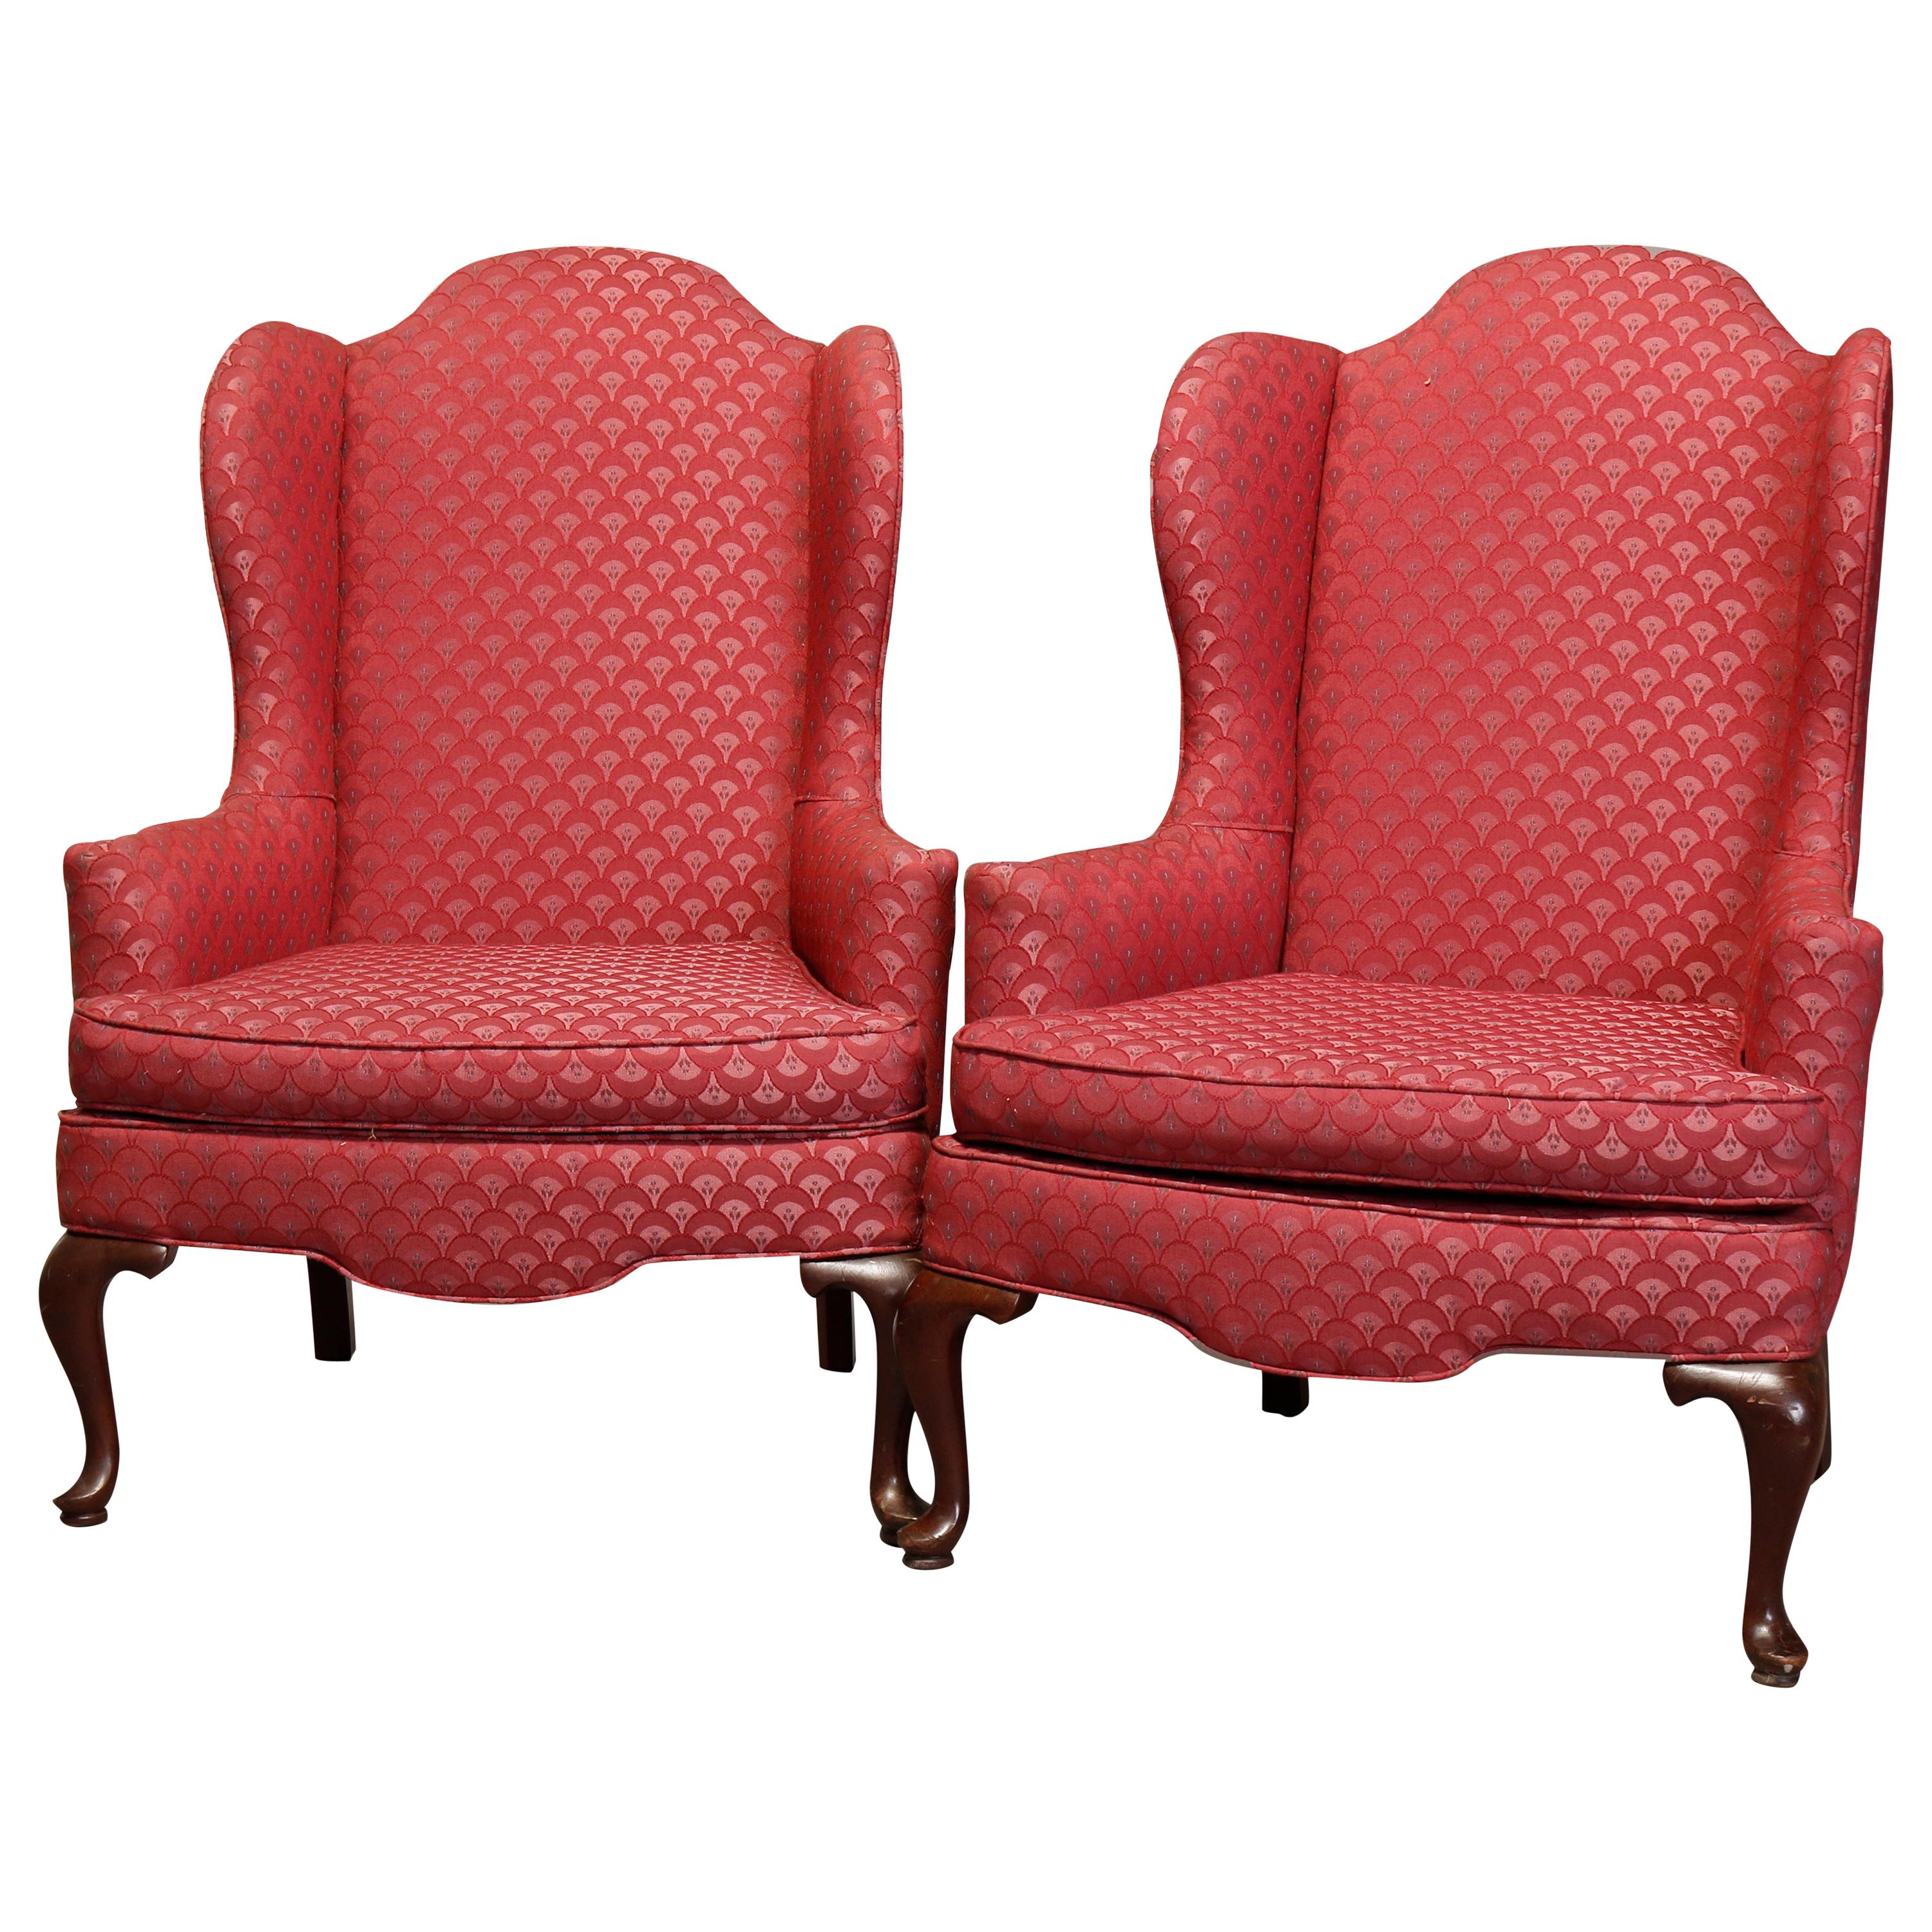 Vintage Pair of Queen Anne Style Mahogany Fireside Wingback Armchairs